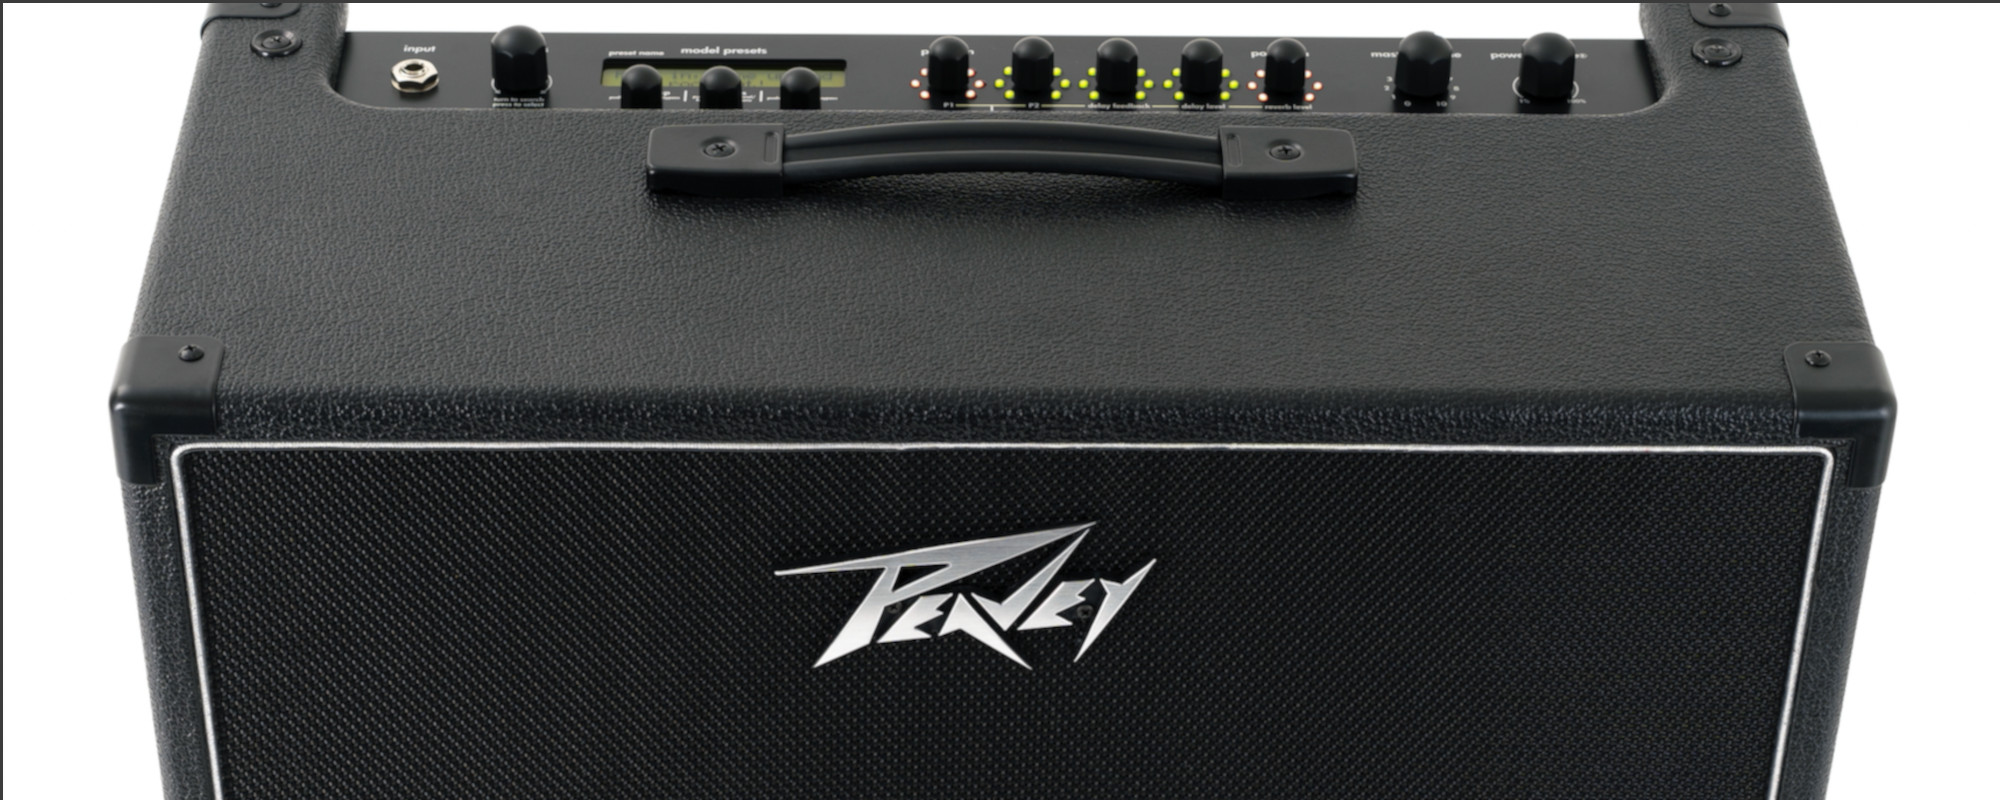 Gear Review: Peavey’s New VYPYR X Amps